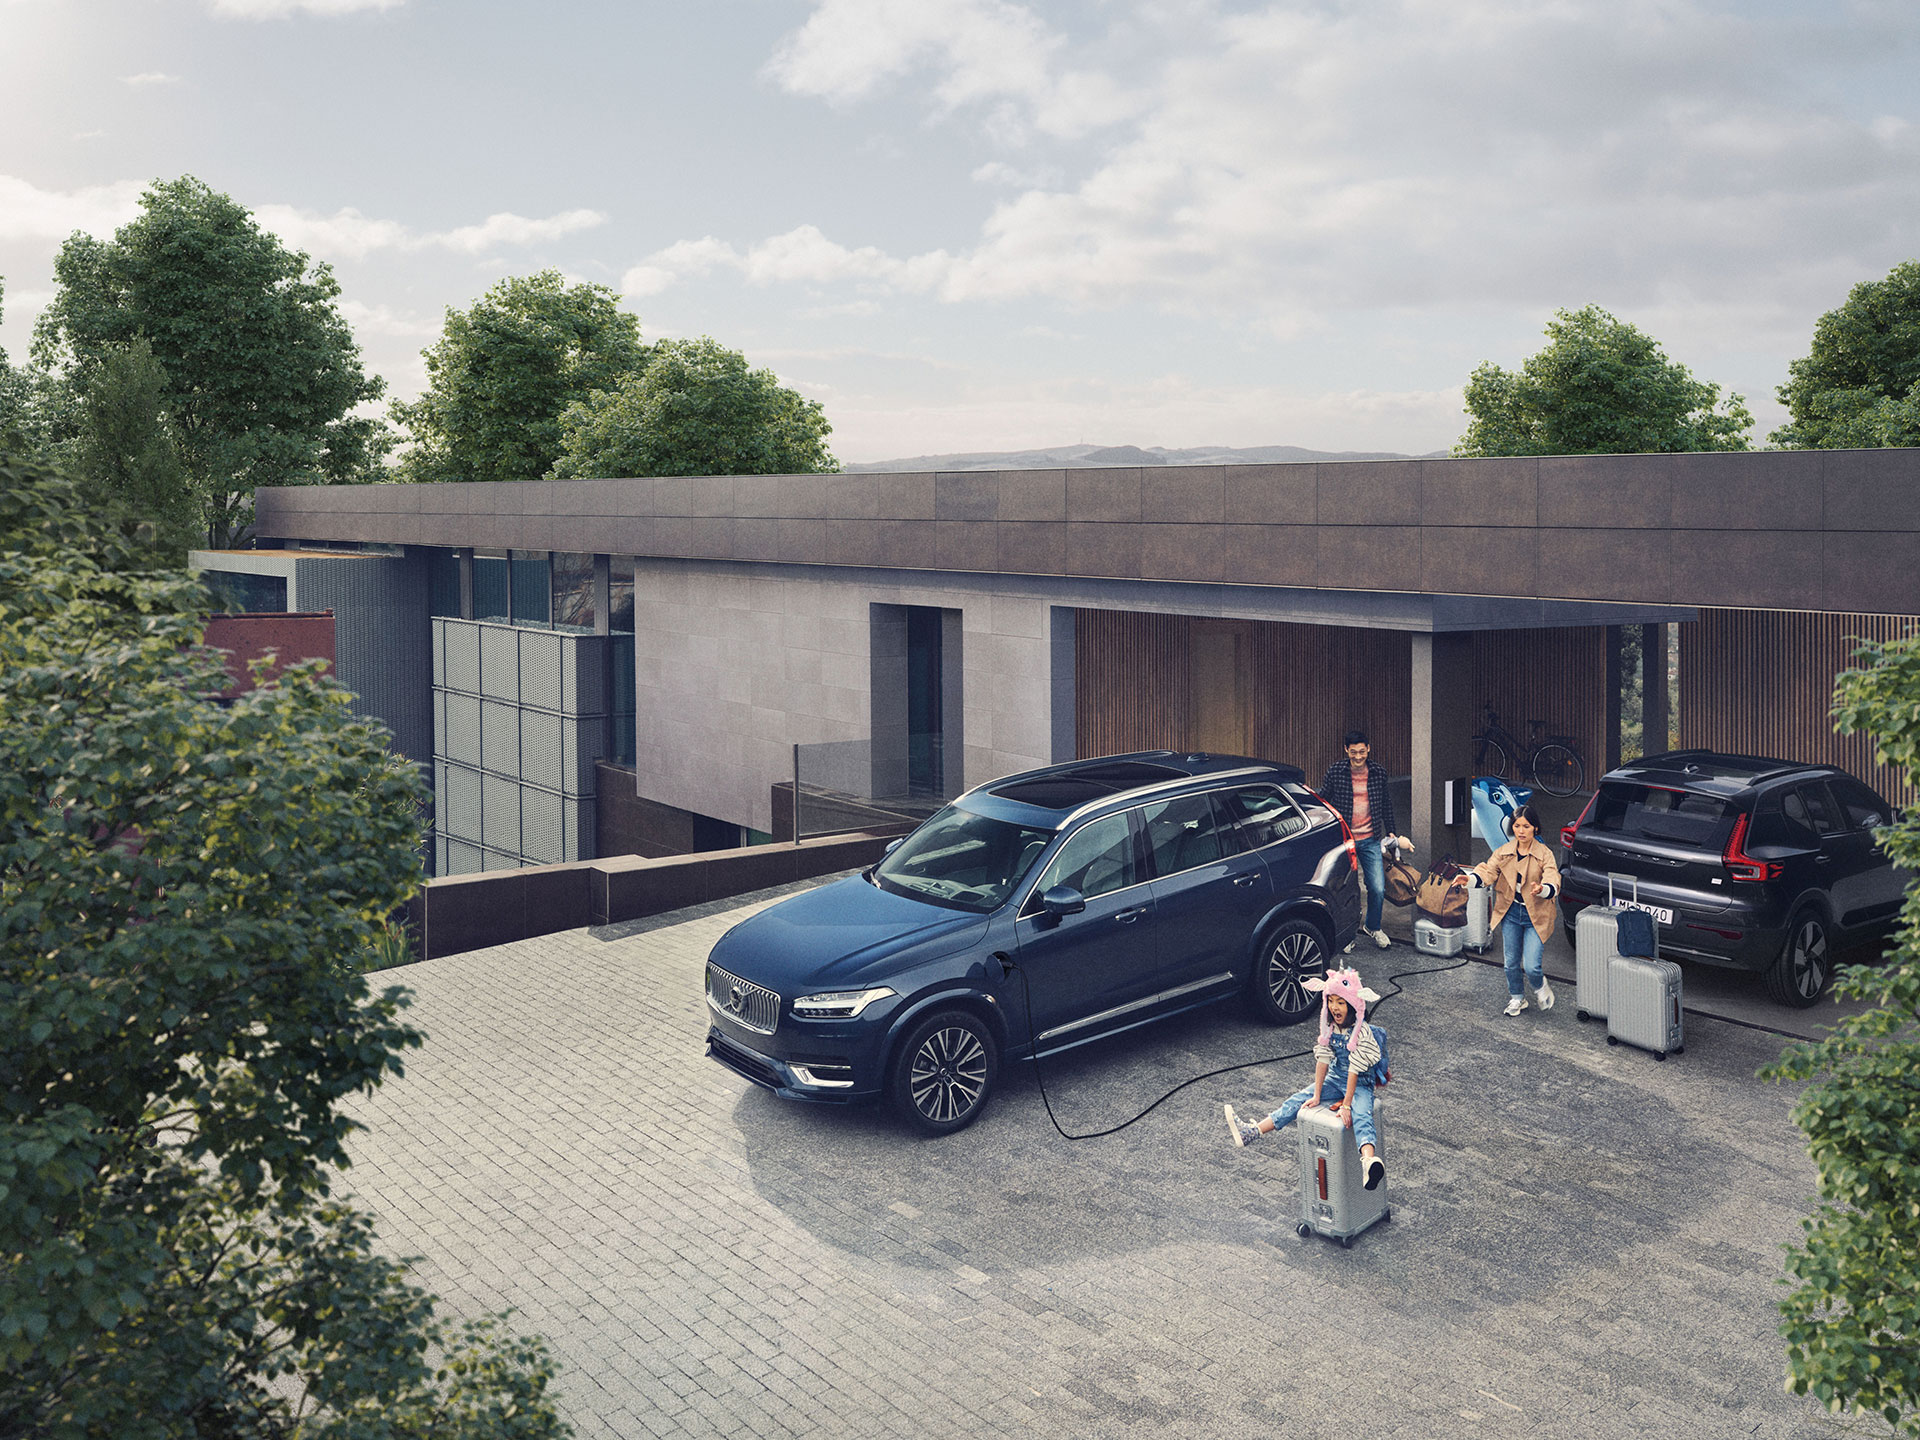 A Volvo XC60 with a family on the go